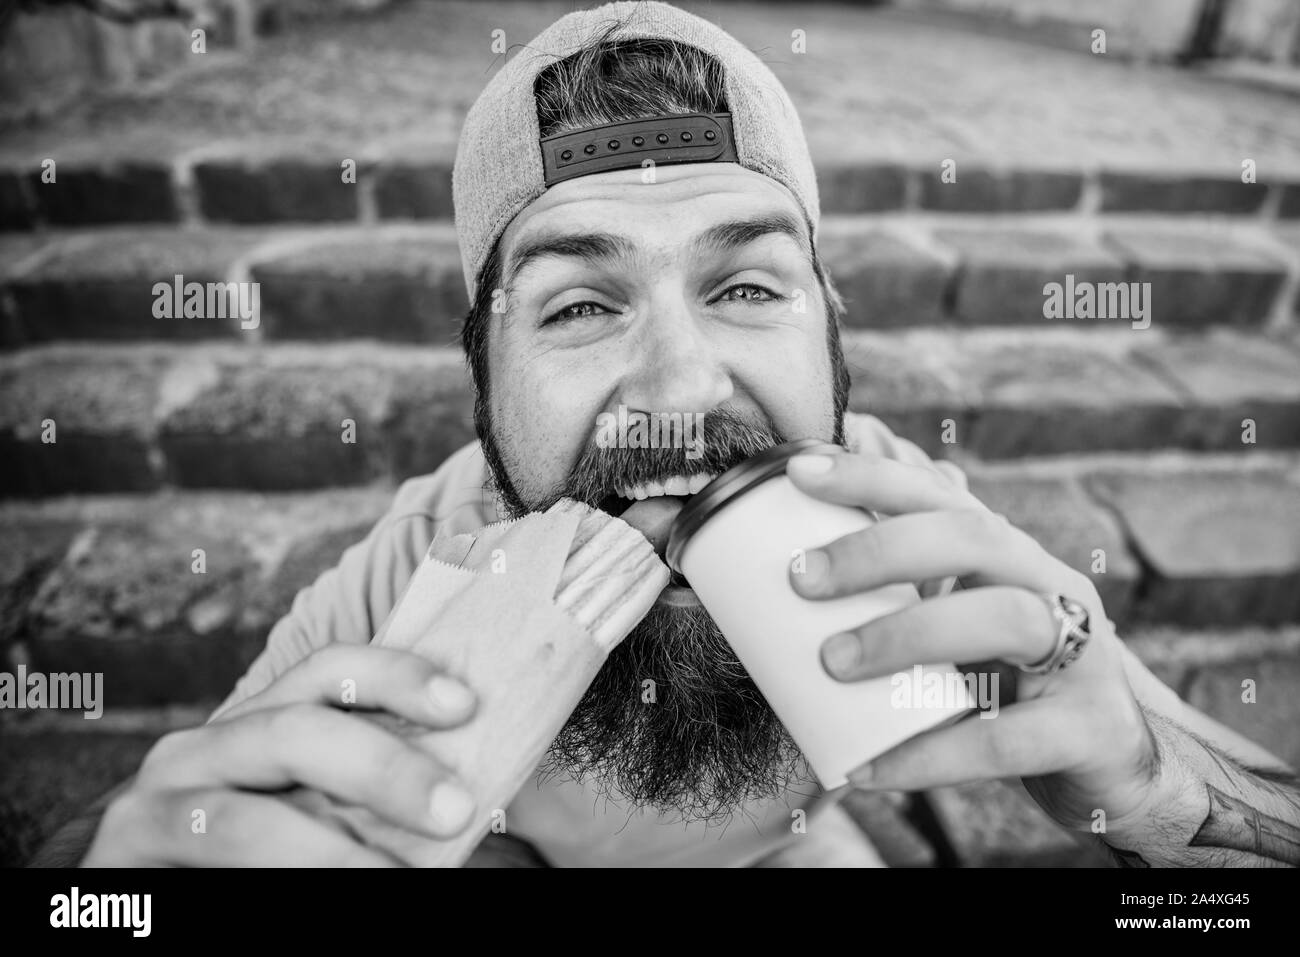 Street food concept. Man bearded eat tasty sausage and drink paper cup. Urban lifestyle nutrition. Junk food. Carefree hipster eat junk food while sit stairs. Guy eating hot dog. Snack for good mood. Stock Photo